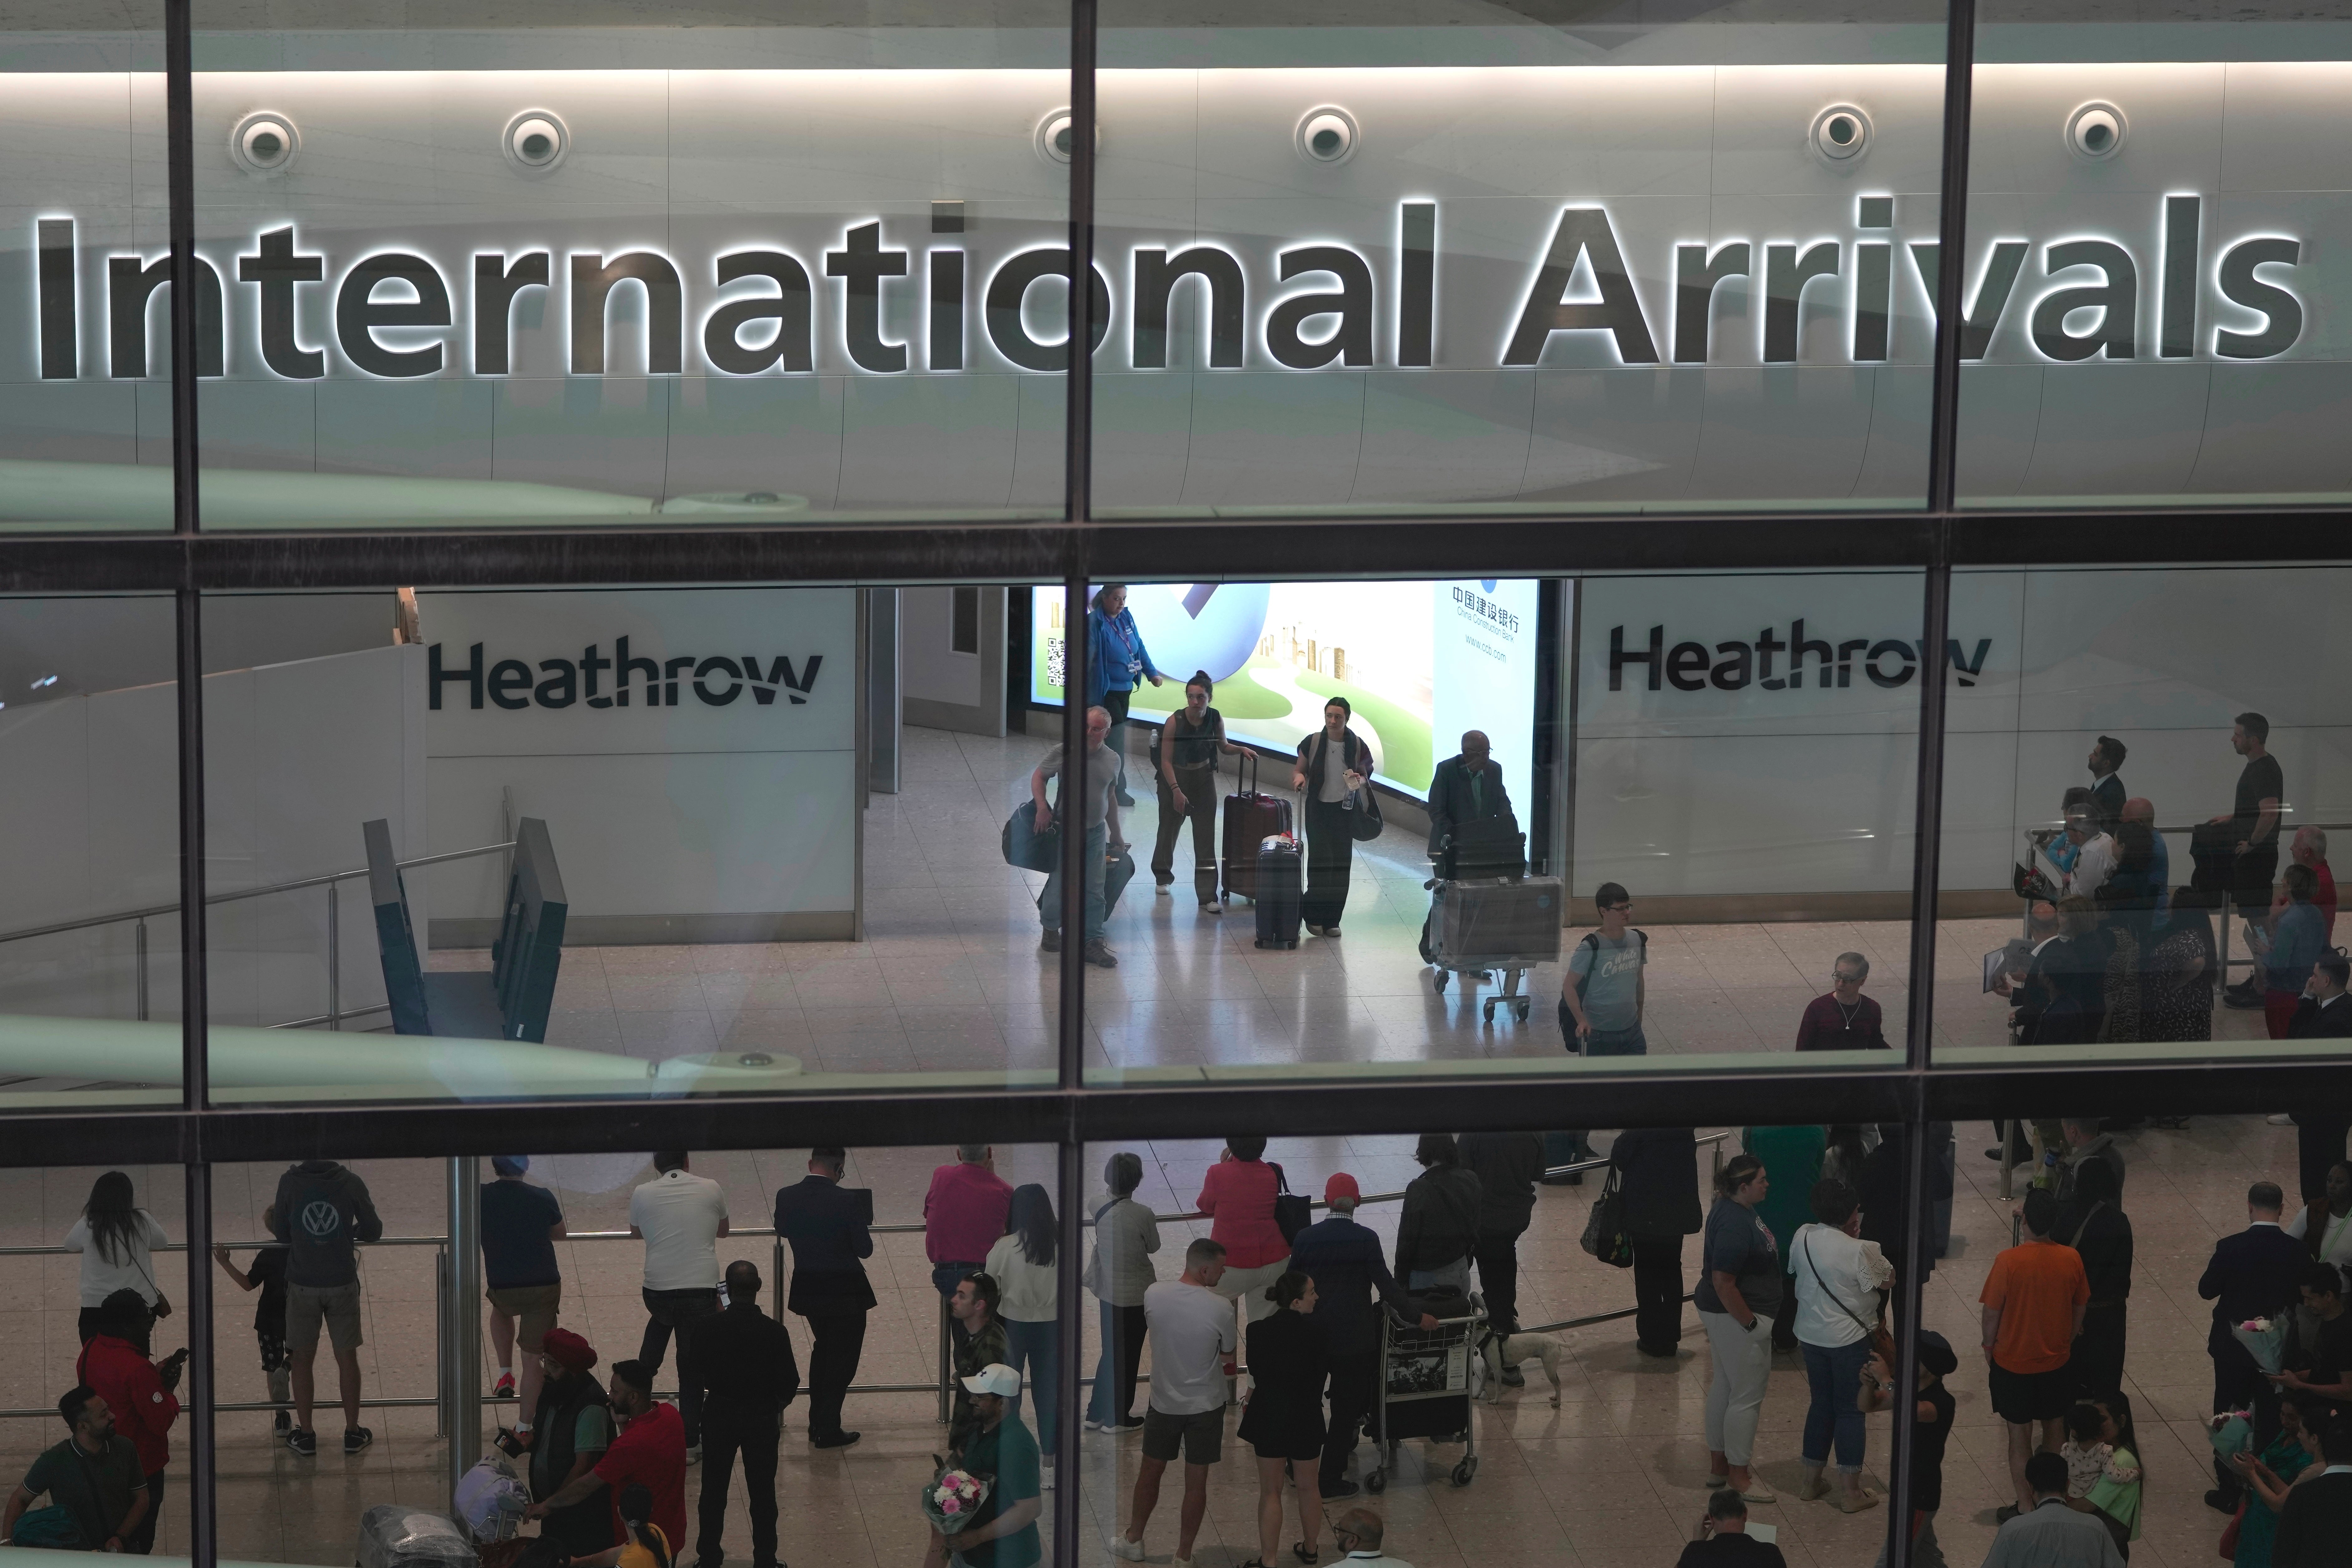 There have already been a series of walkouts at Heathrow this year